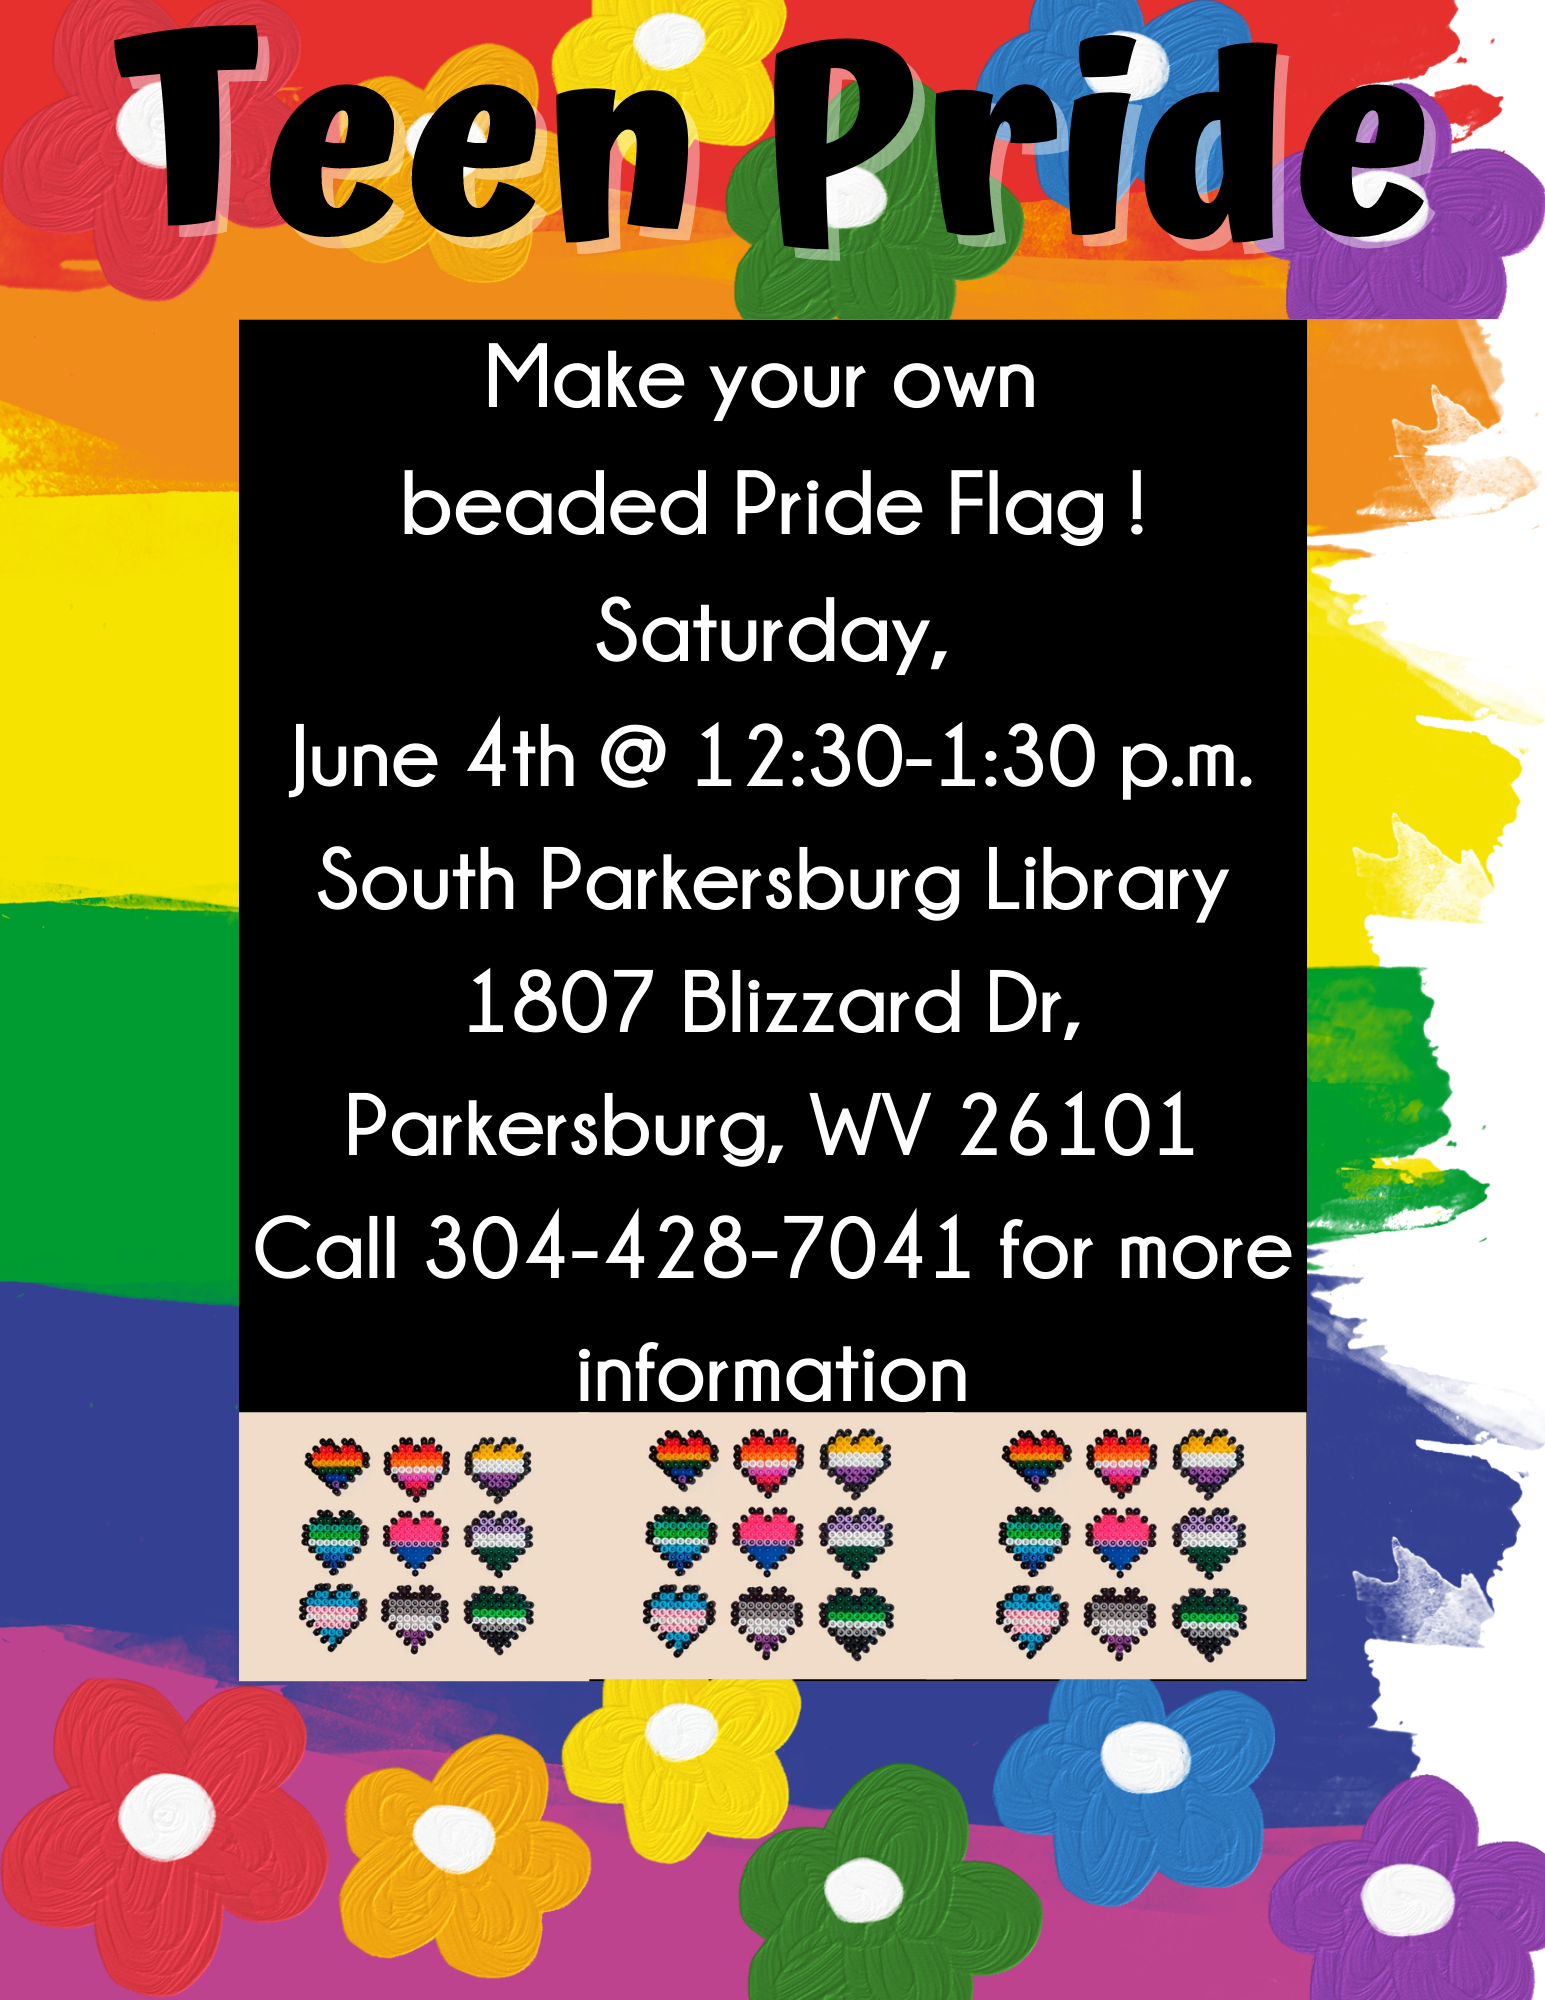 Teen Pride at South Parkersburg Library!